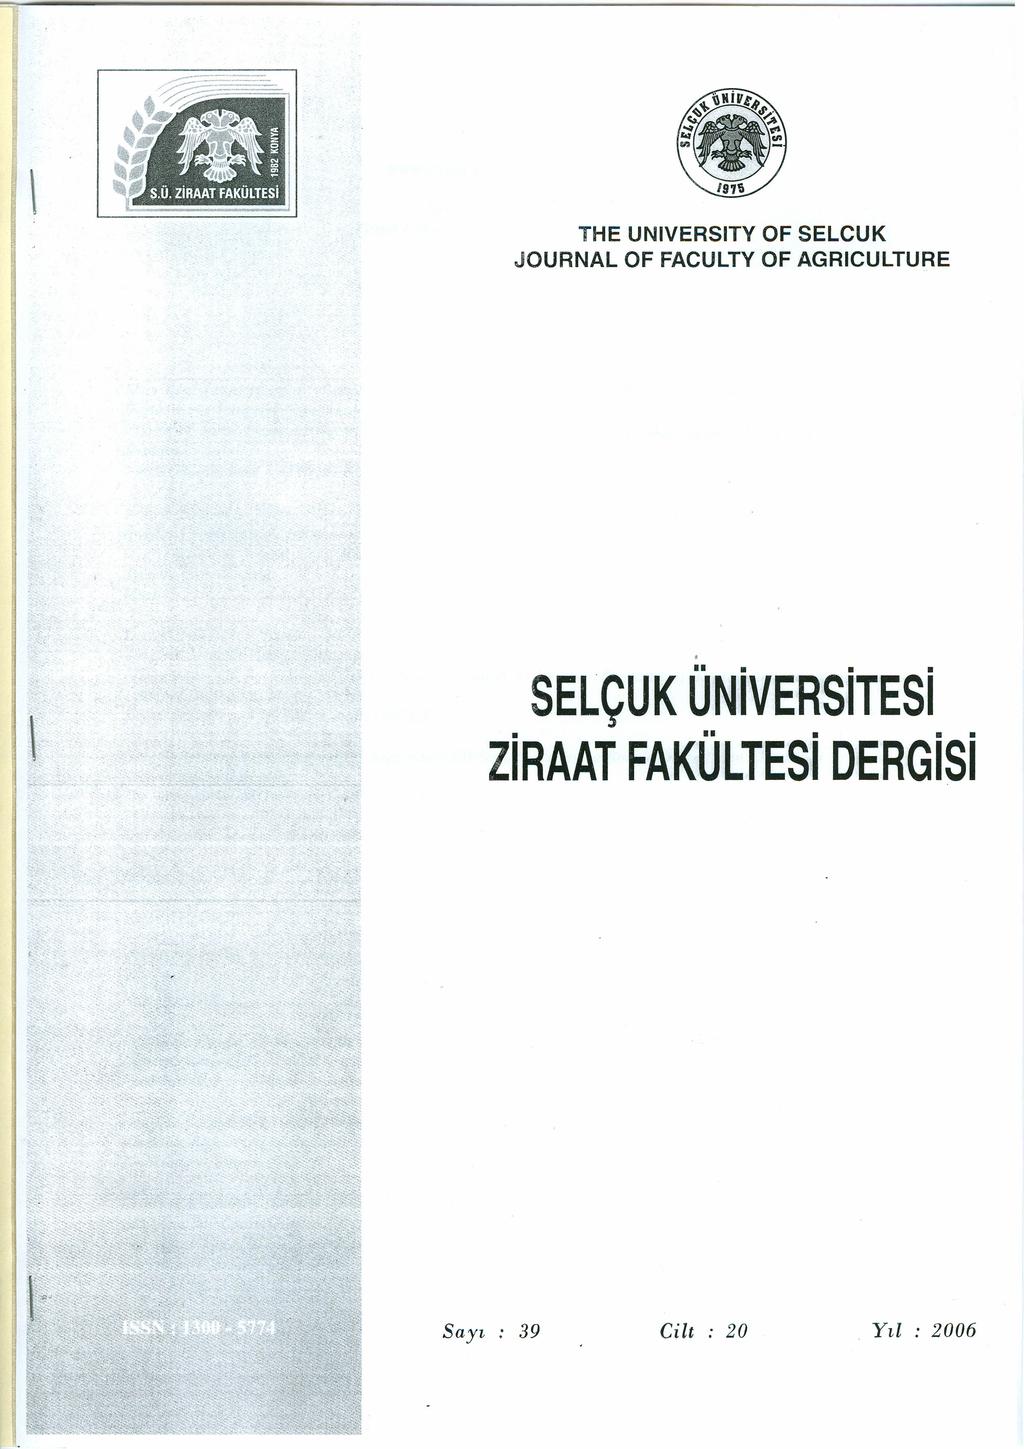 \ THE UNIVERSITY OF SELCUK JOURNAL OF FACUlTY OF AGRICUlTURE.